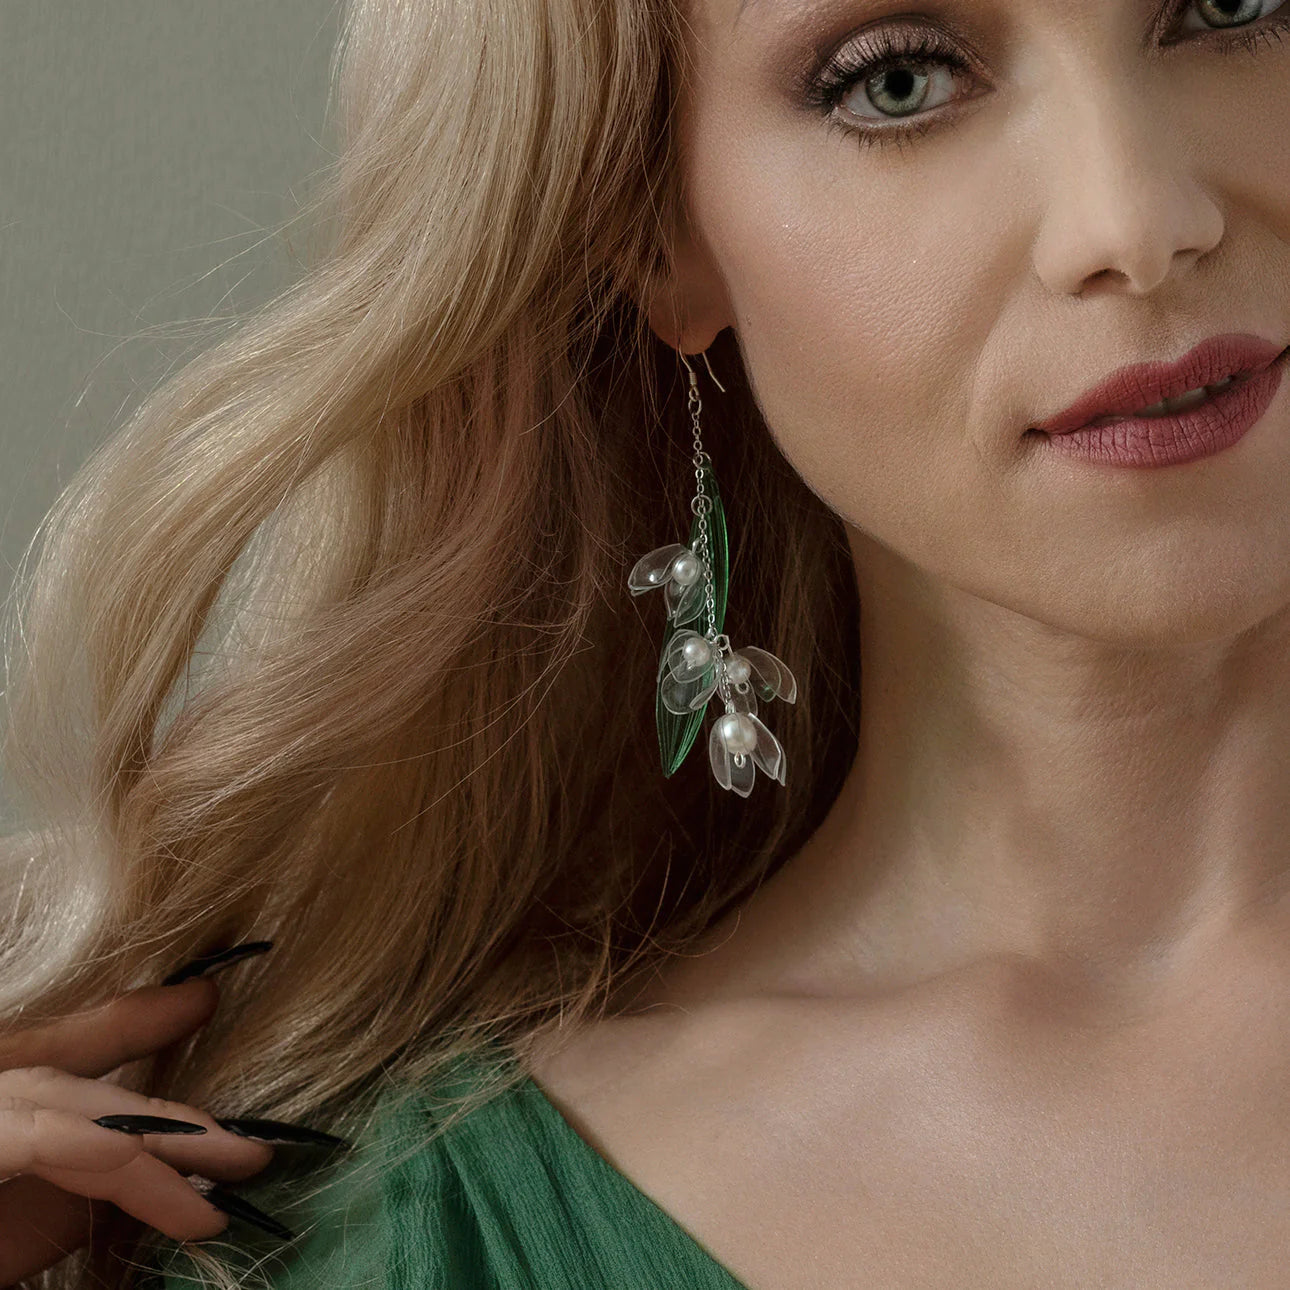 Lily of The Walley, Mismatched earrings